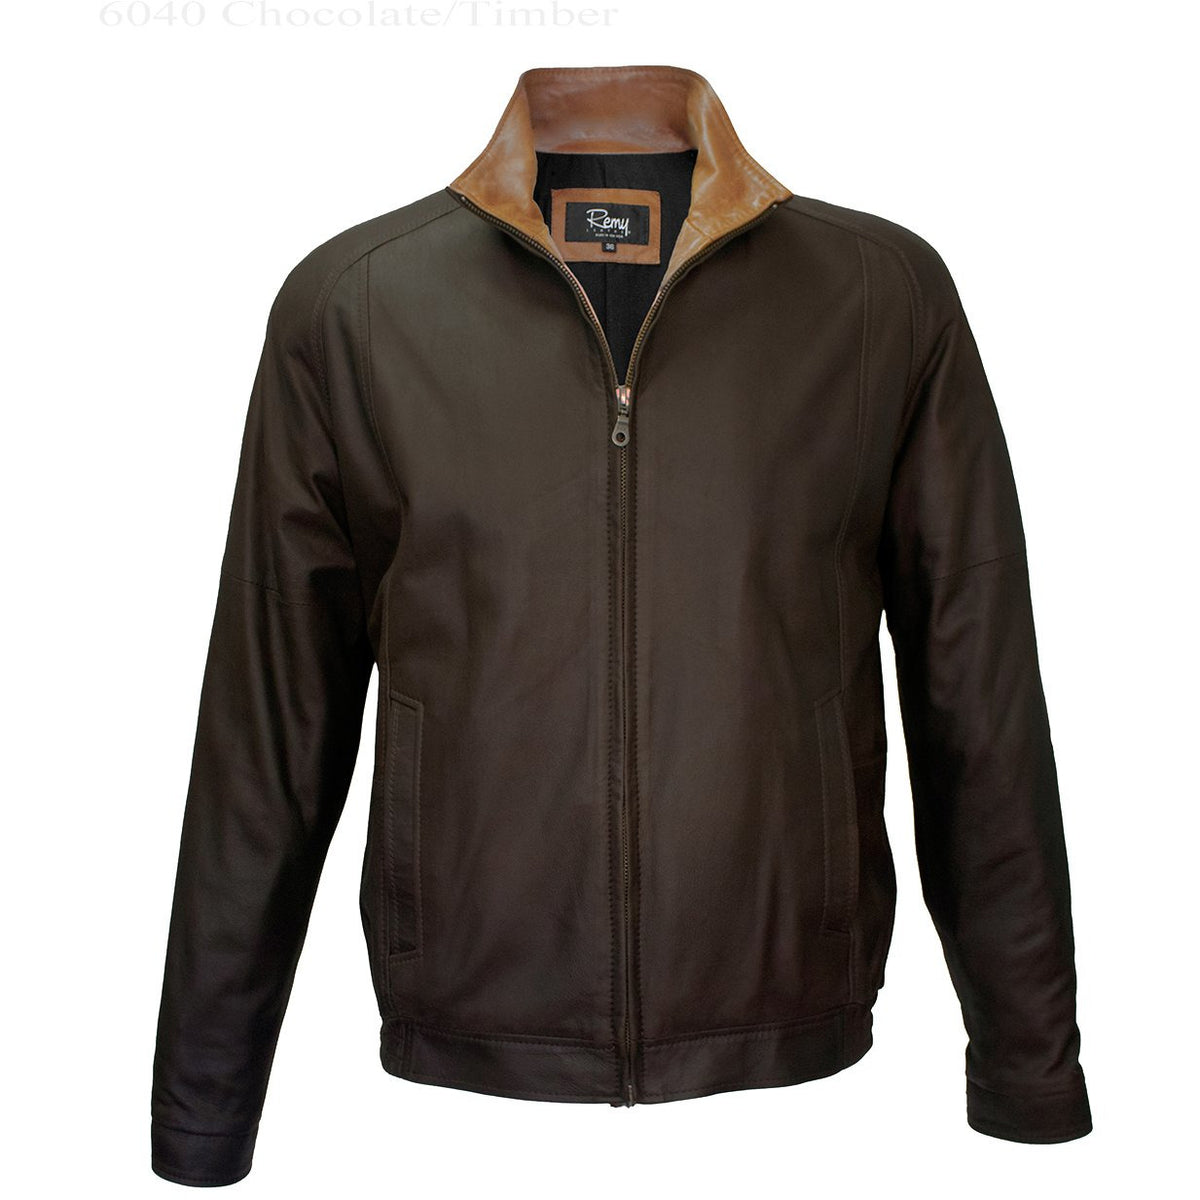 6040 - Mens Single Collar Leather Bomber Jacket in Chocolate